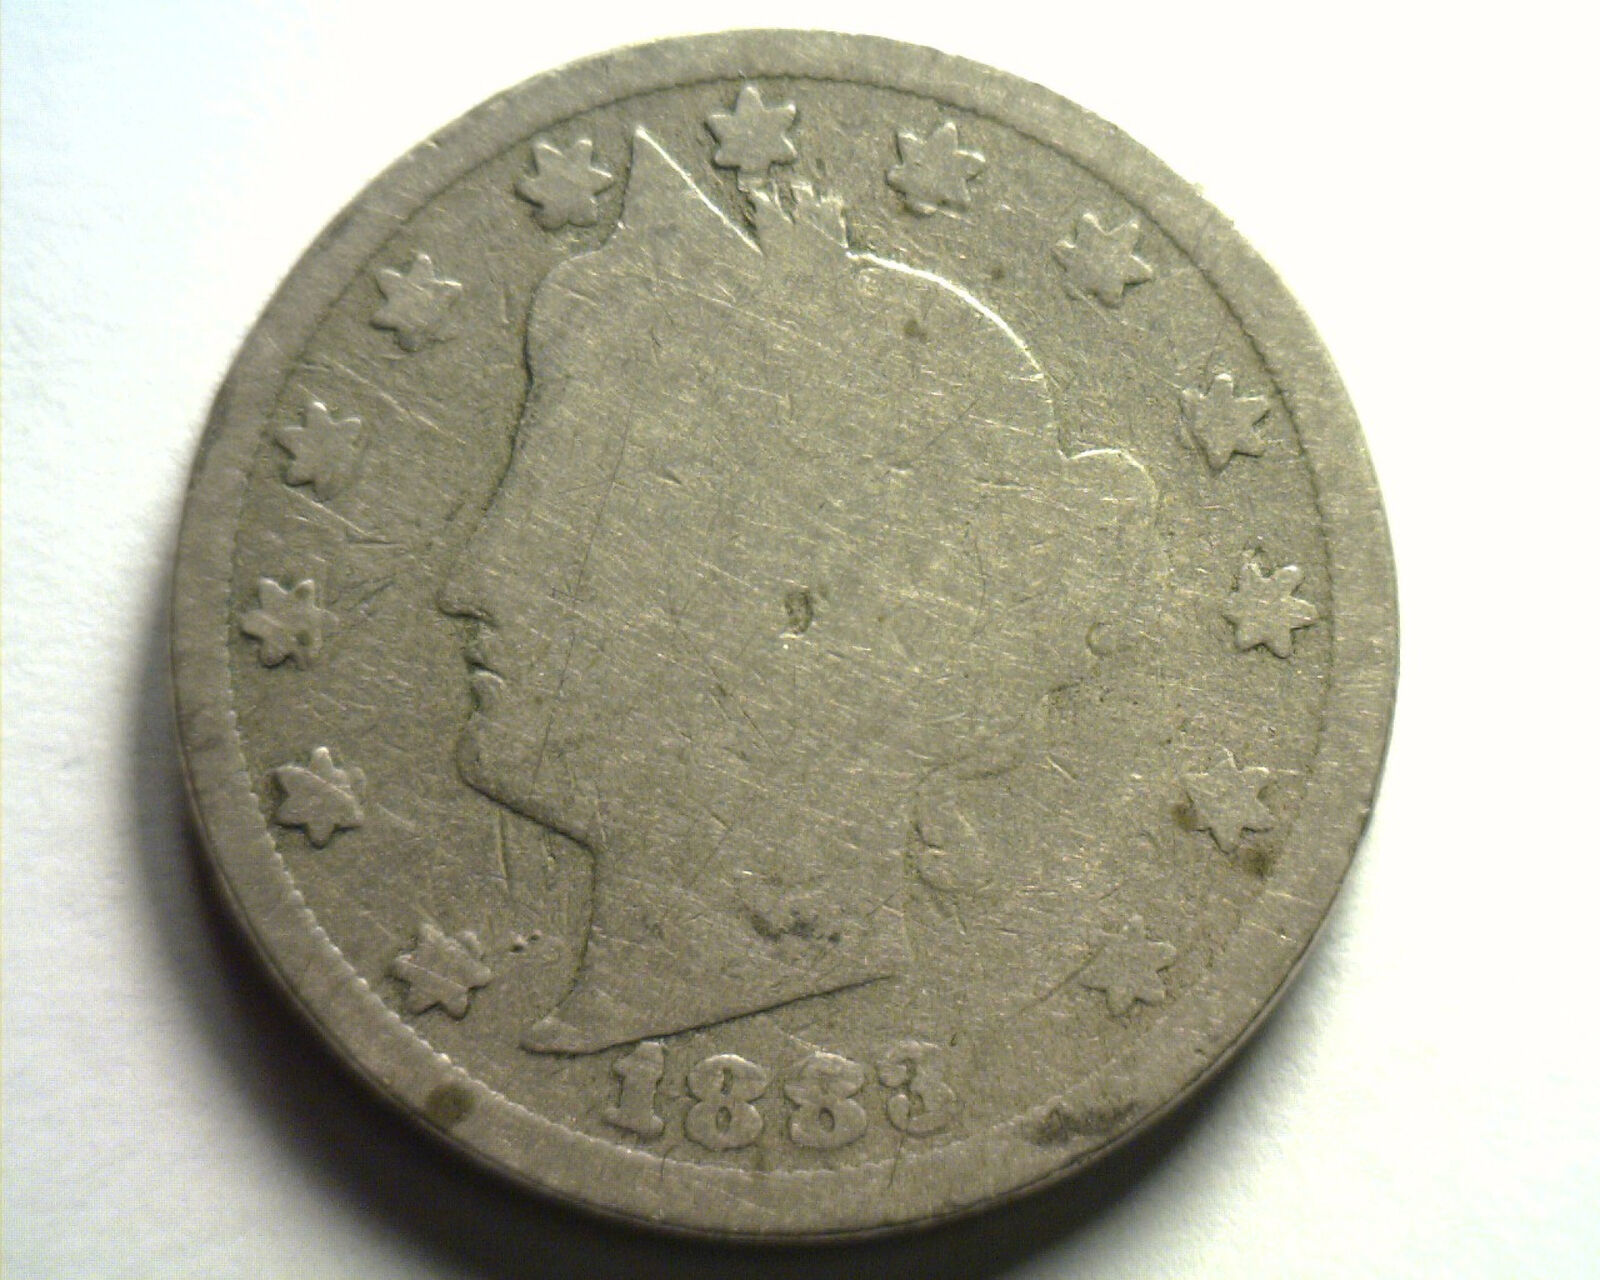 1883 WITH CENTS LIBERTY NICKEL ABOUT GOOD AG NICE ORIGINAL COIN FROM BOBS COINS - $12.00